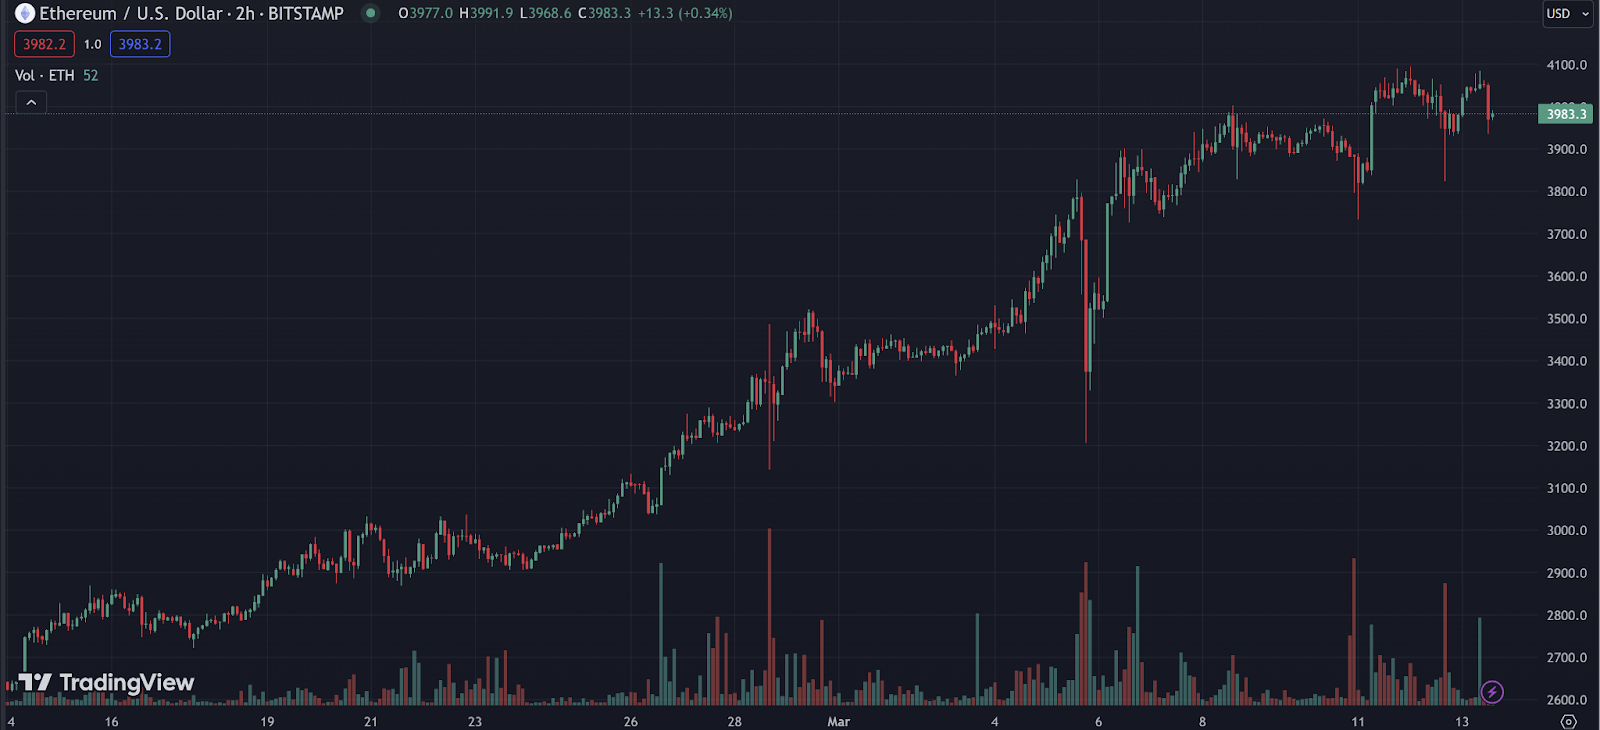 ETH-USD 1-month price chart Via Trading View